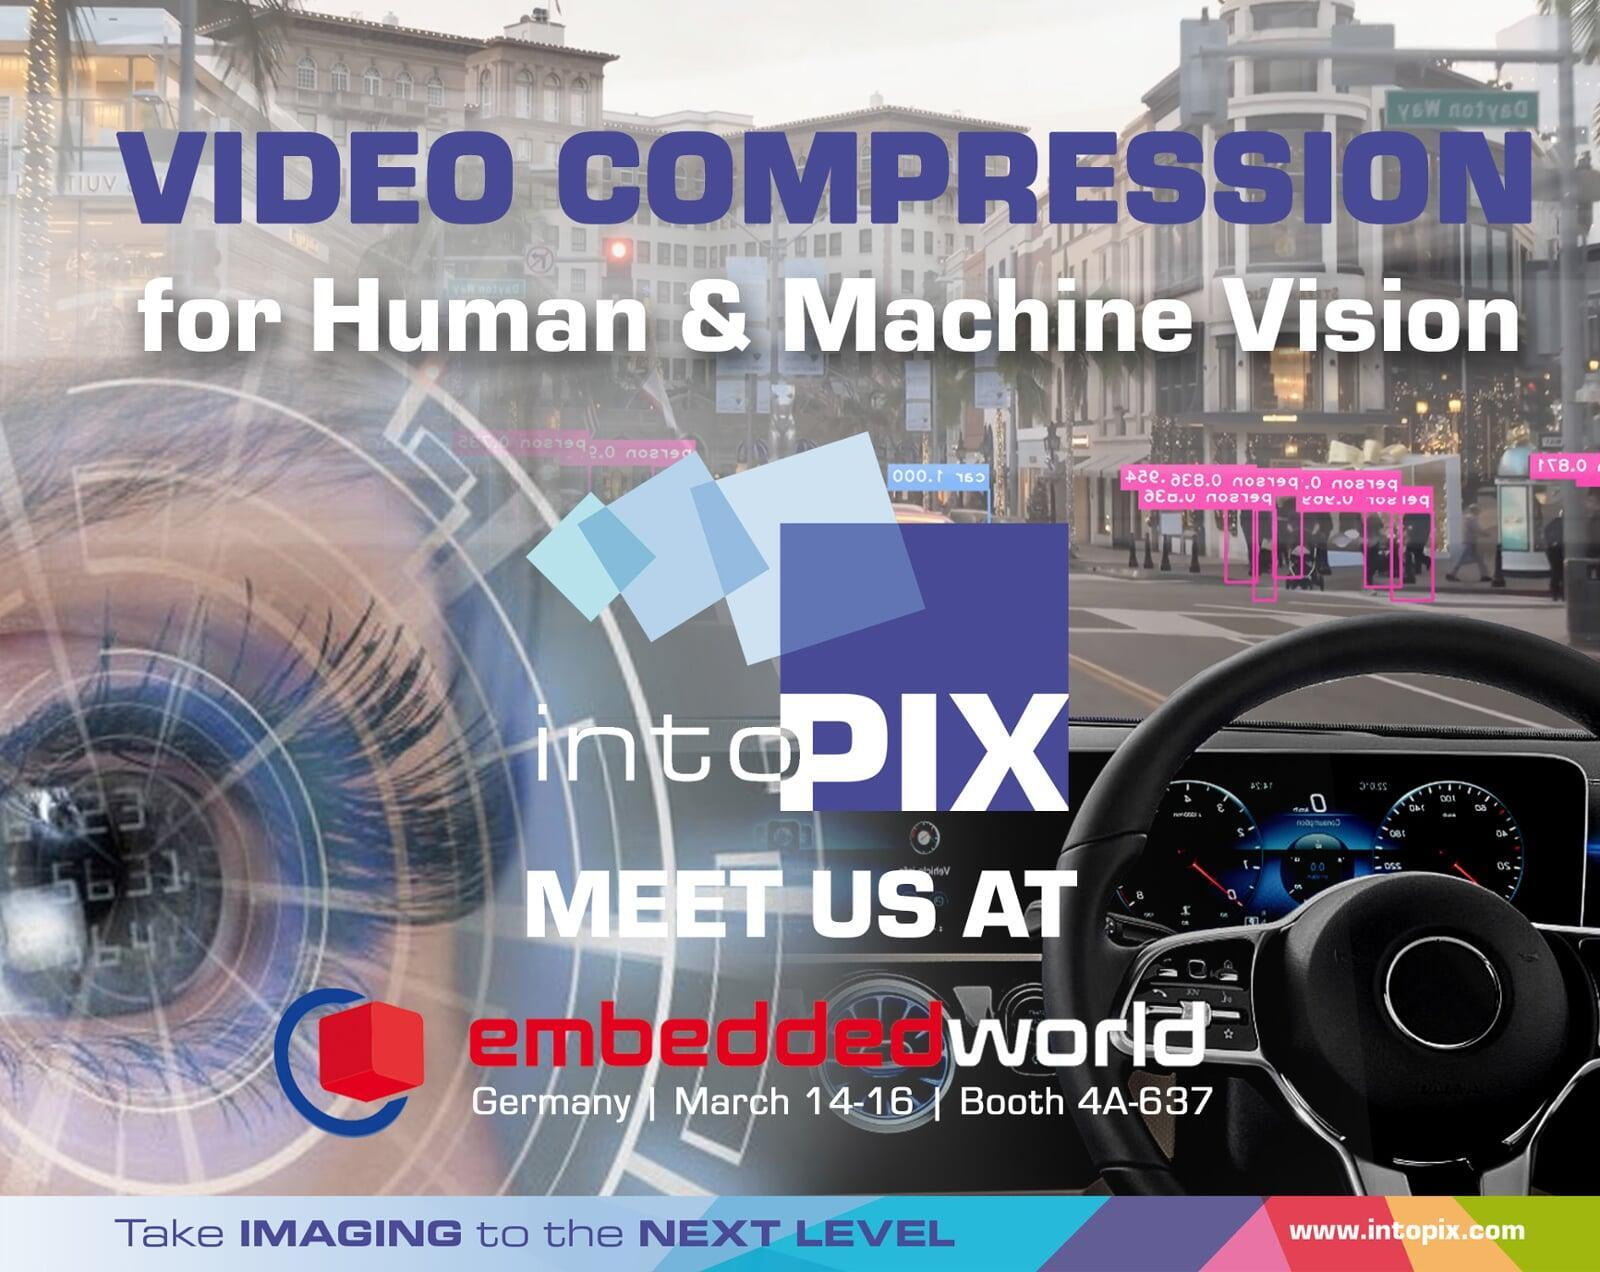 intoPIX showcases its innovative image processing and compression solutions for human & machine vision at Embedded World 2023